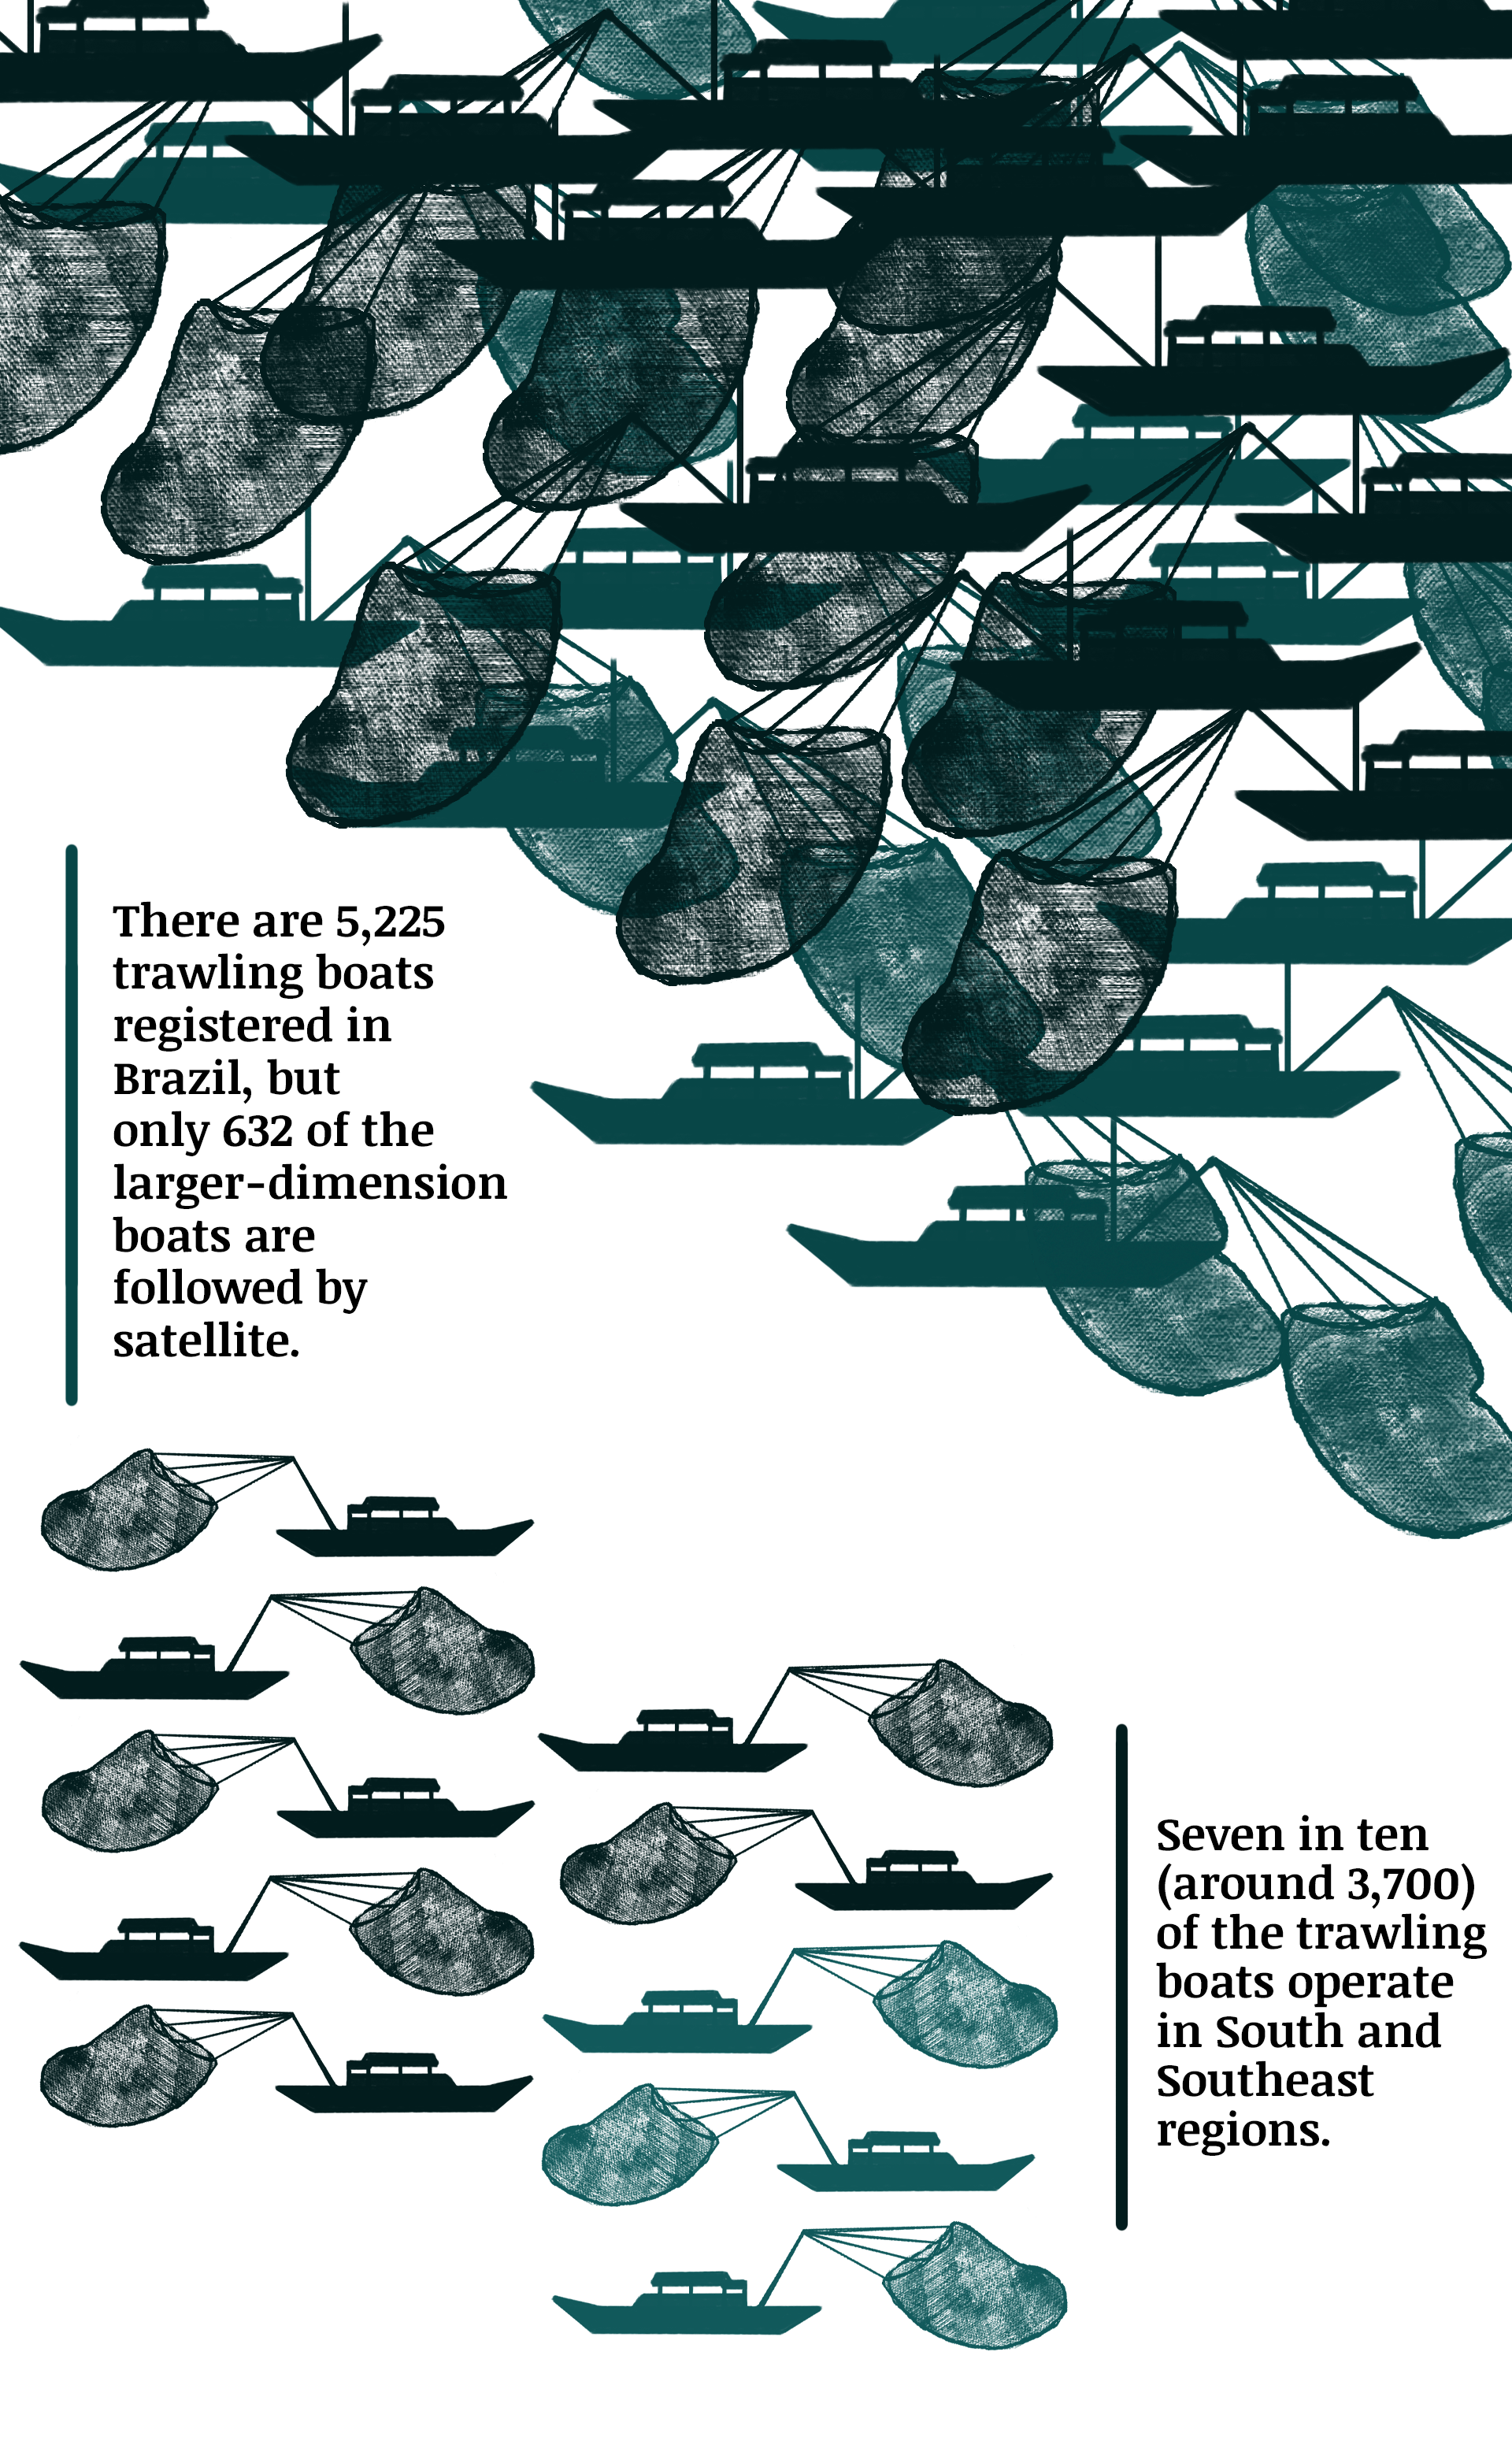 A graphic with information on number of trawling boats in Brazil.